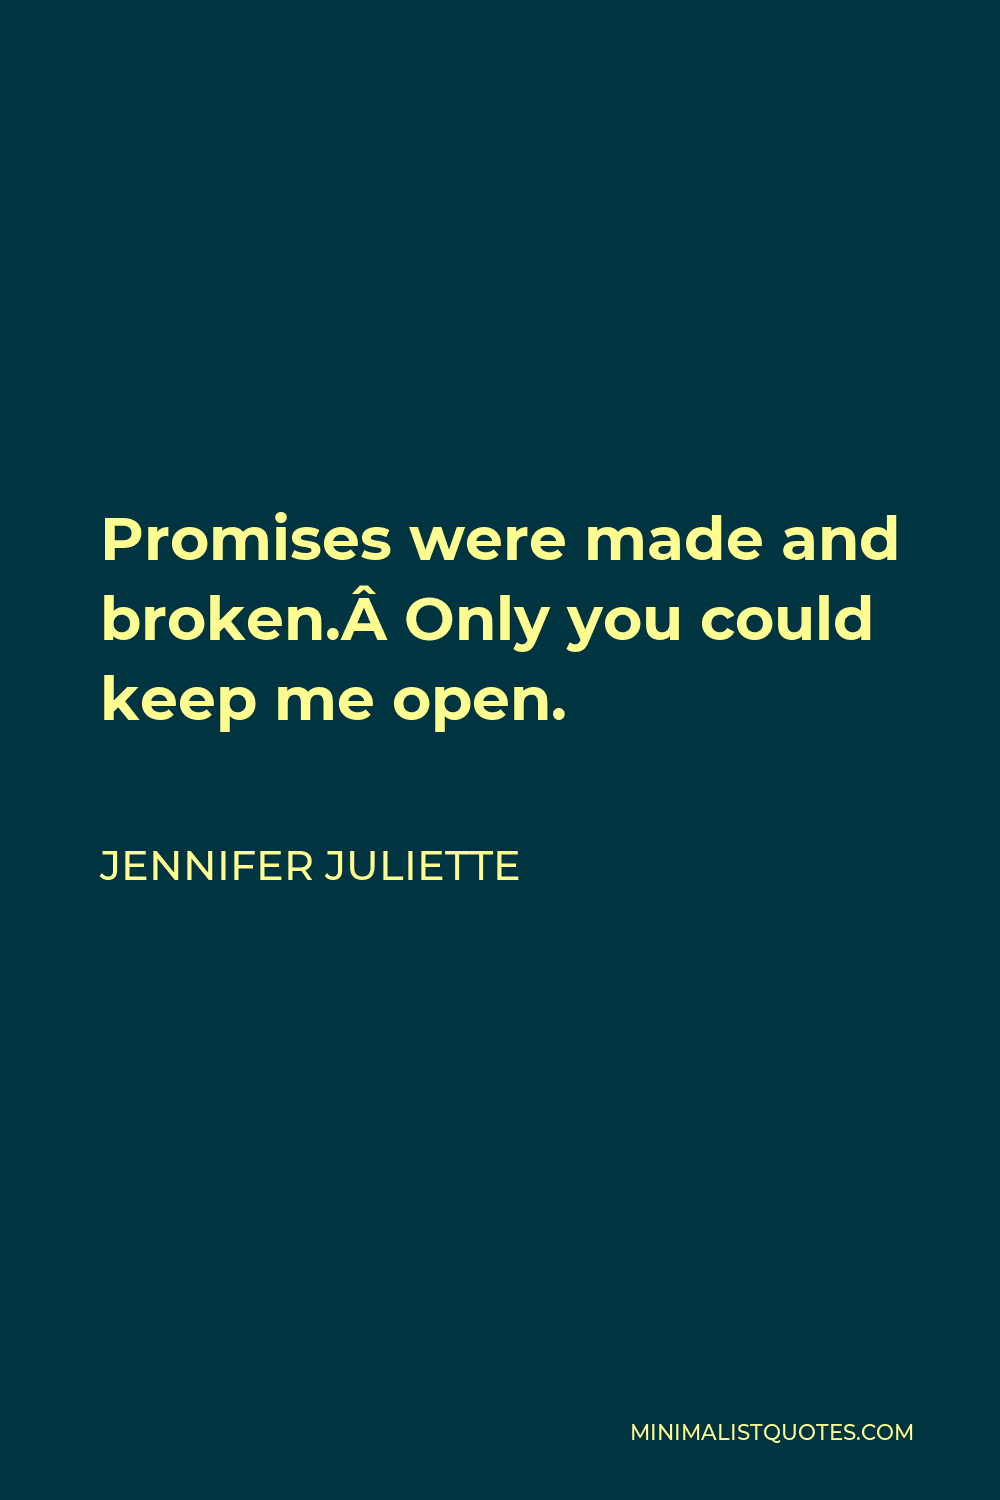 Jennifer Juliette Quote - Promises were made and broken. Only you could keep me open.